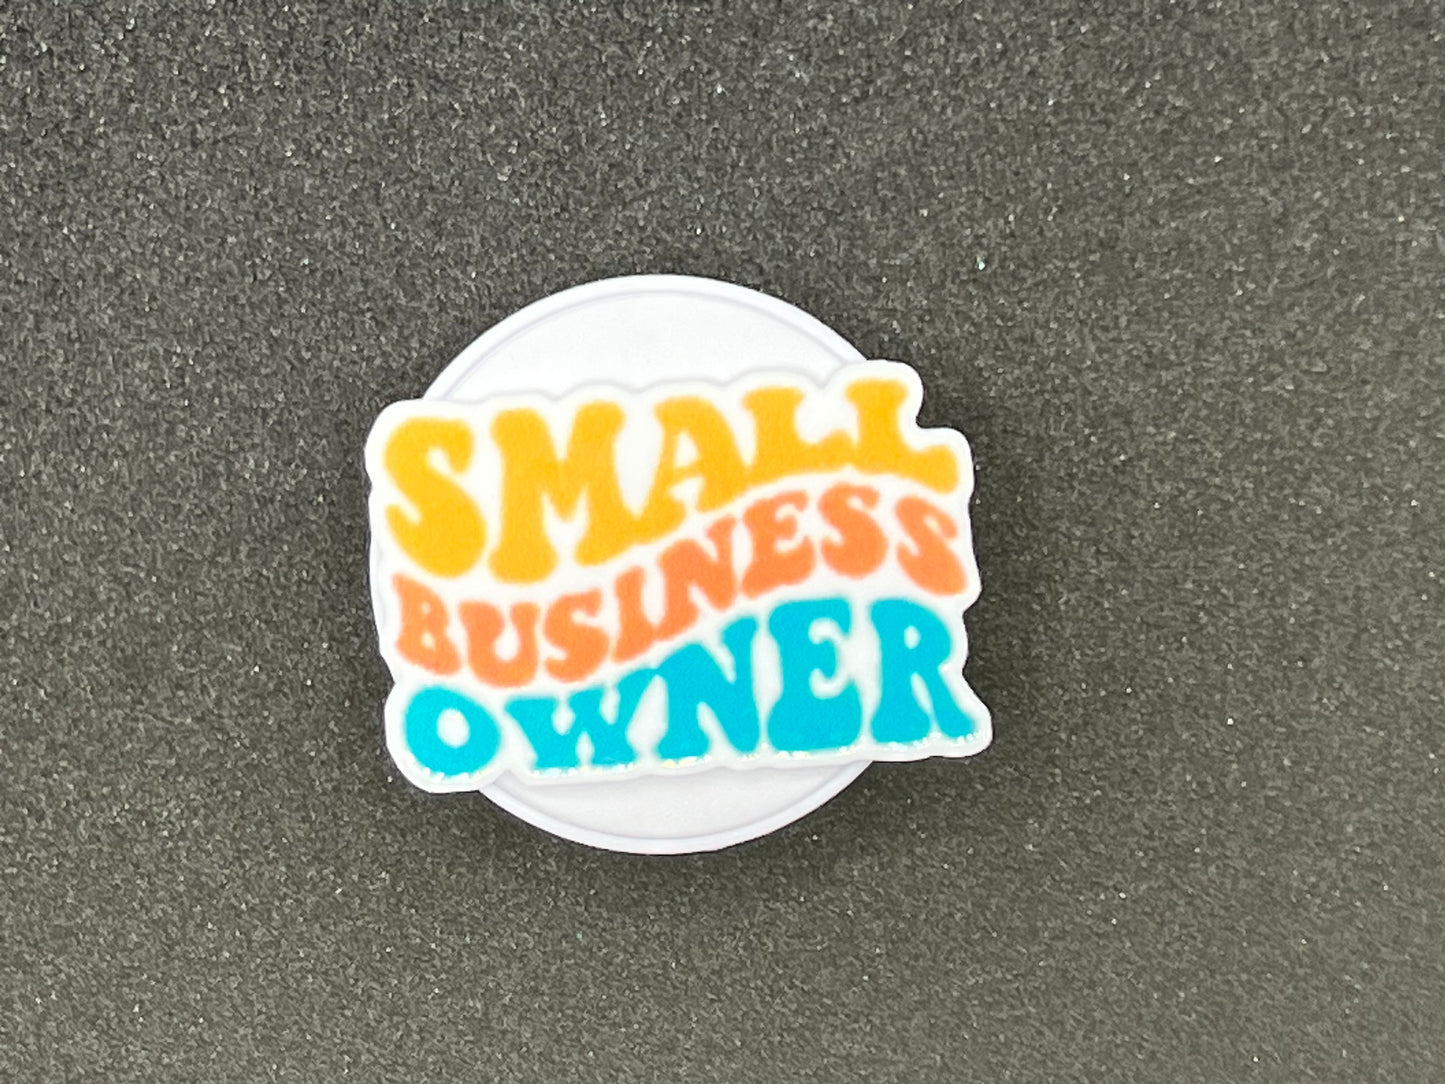 Small Business Owner pop socket